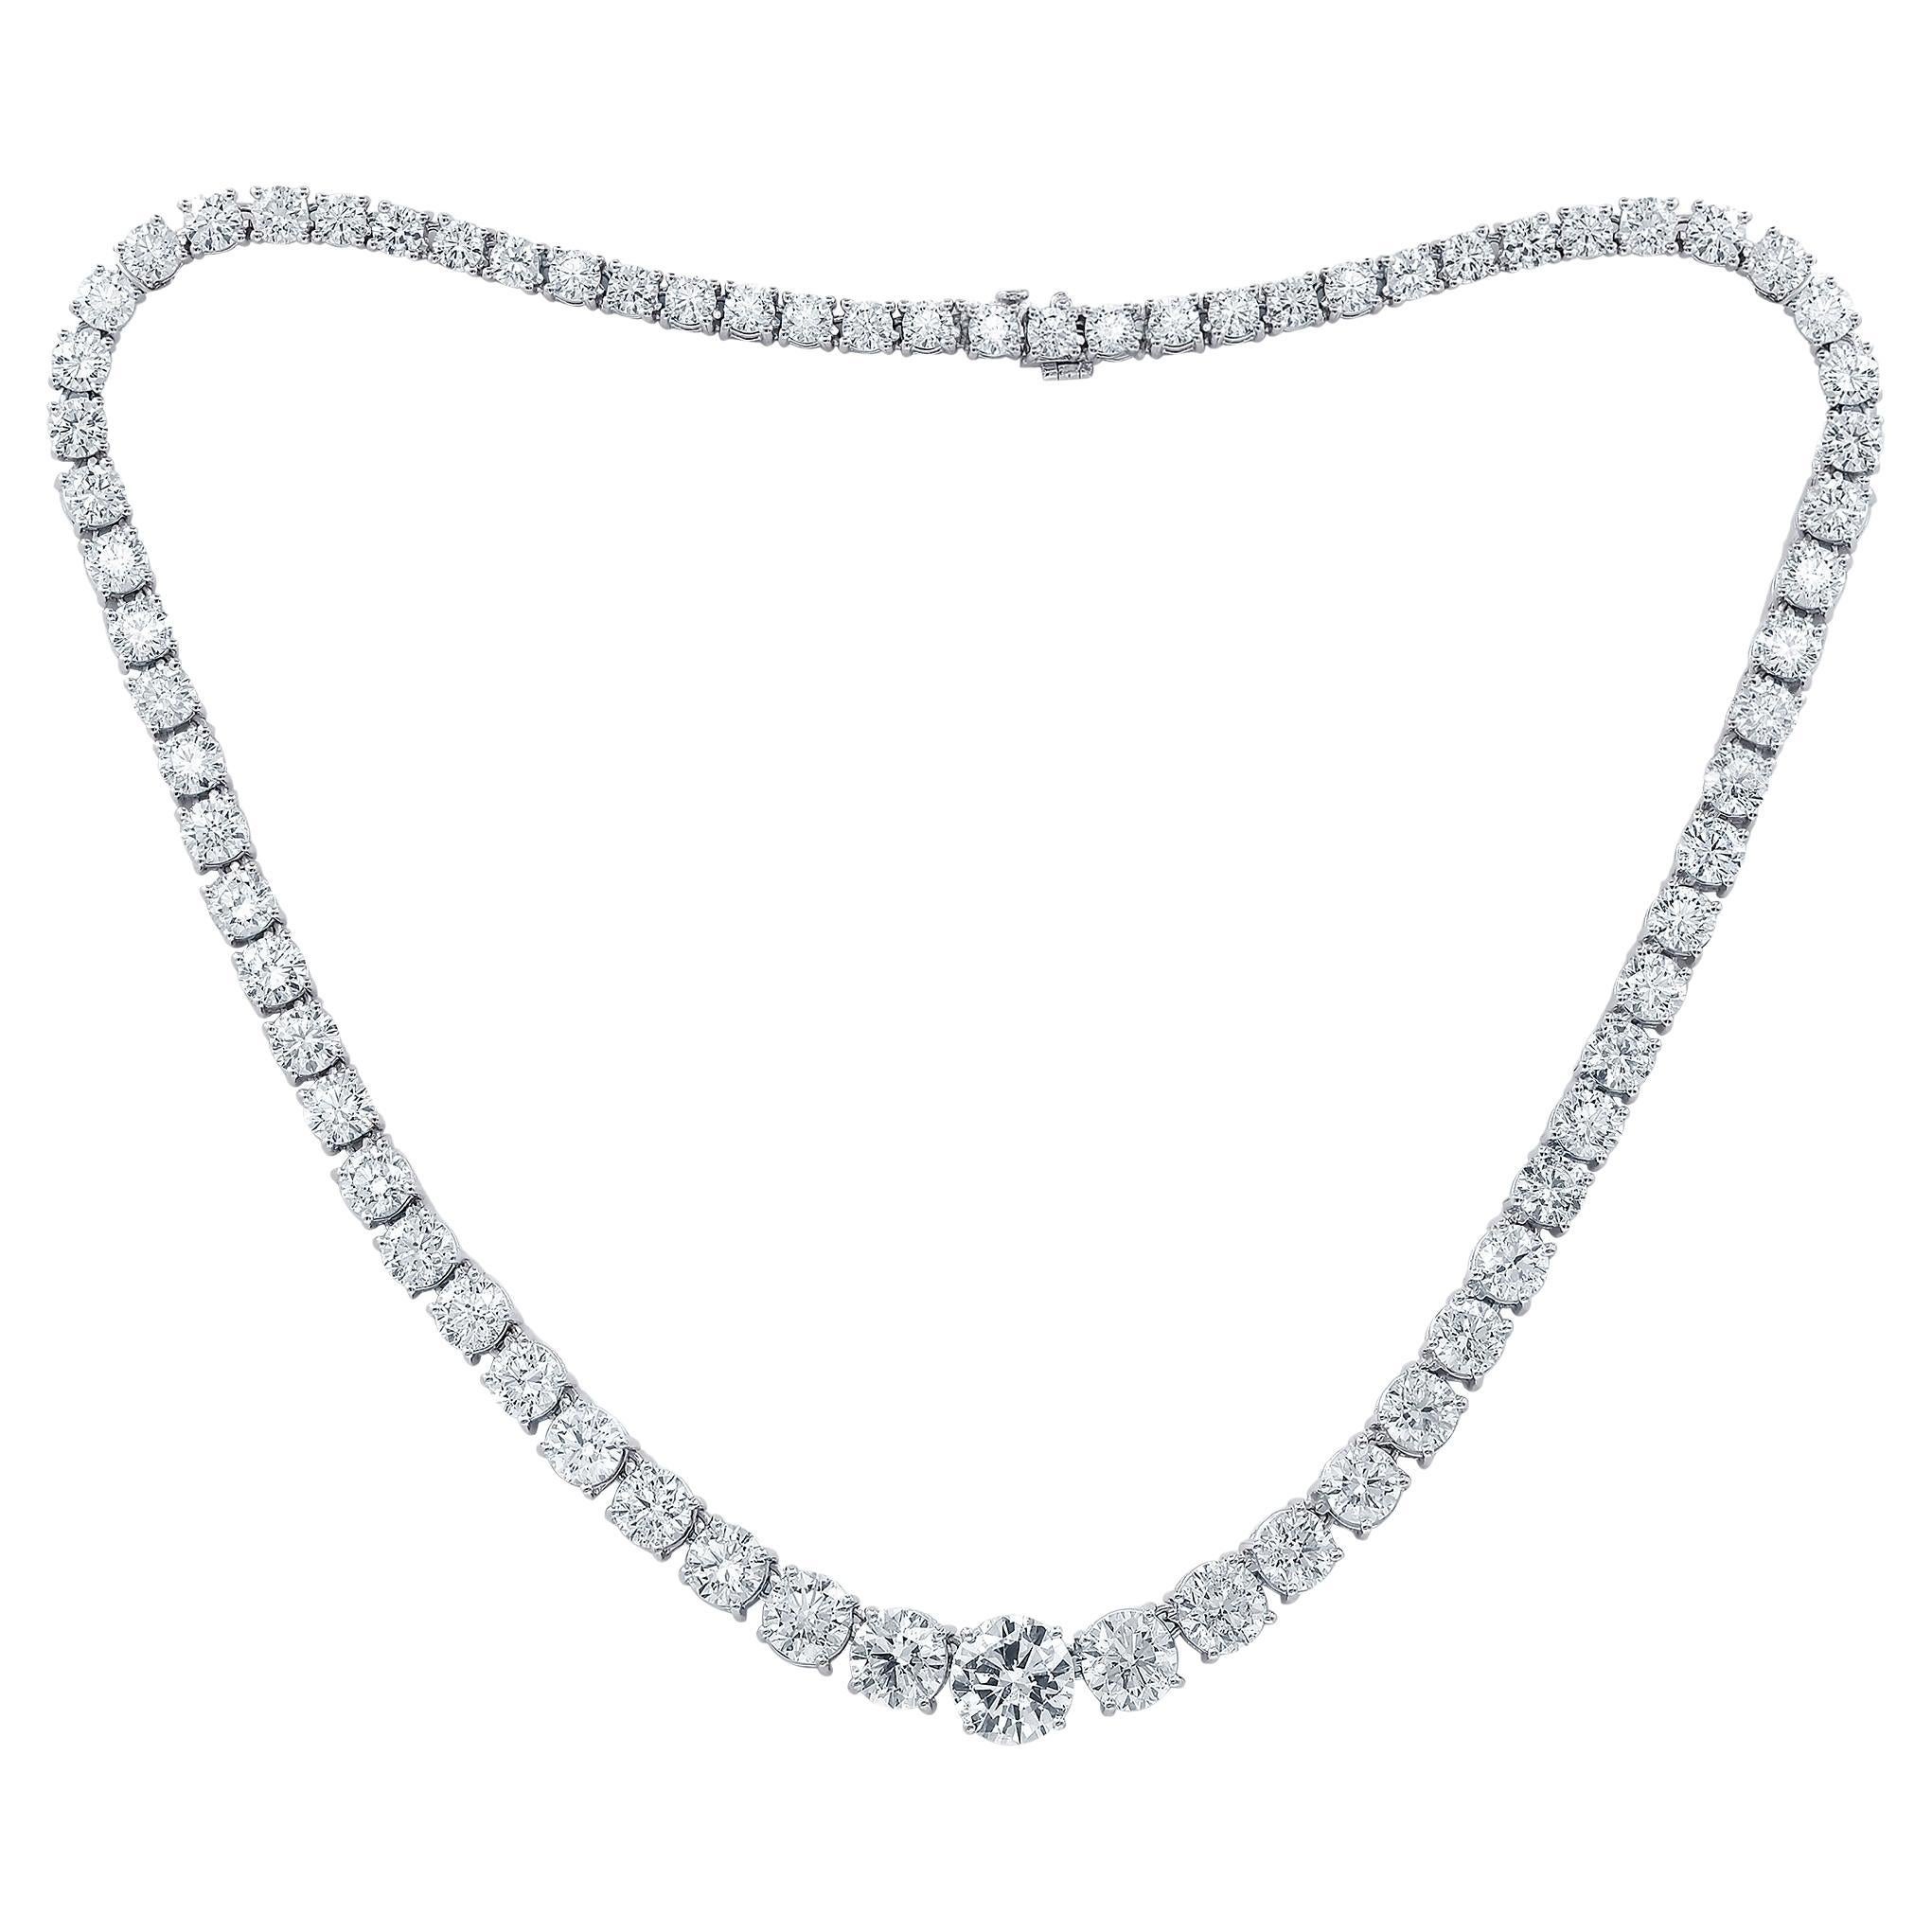 Diana M. Dazzling Riviera Necklace with 45.49cts all GIA flawless diamonds